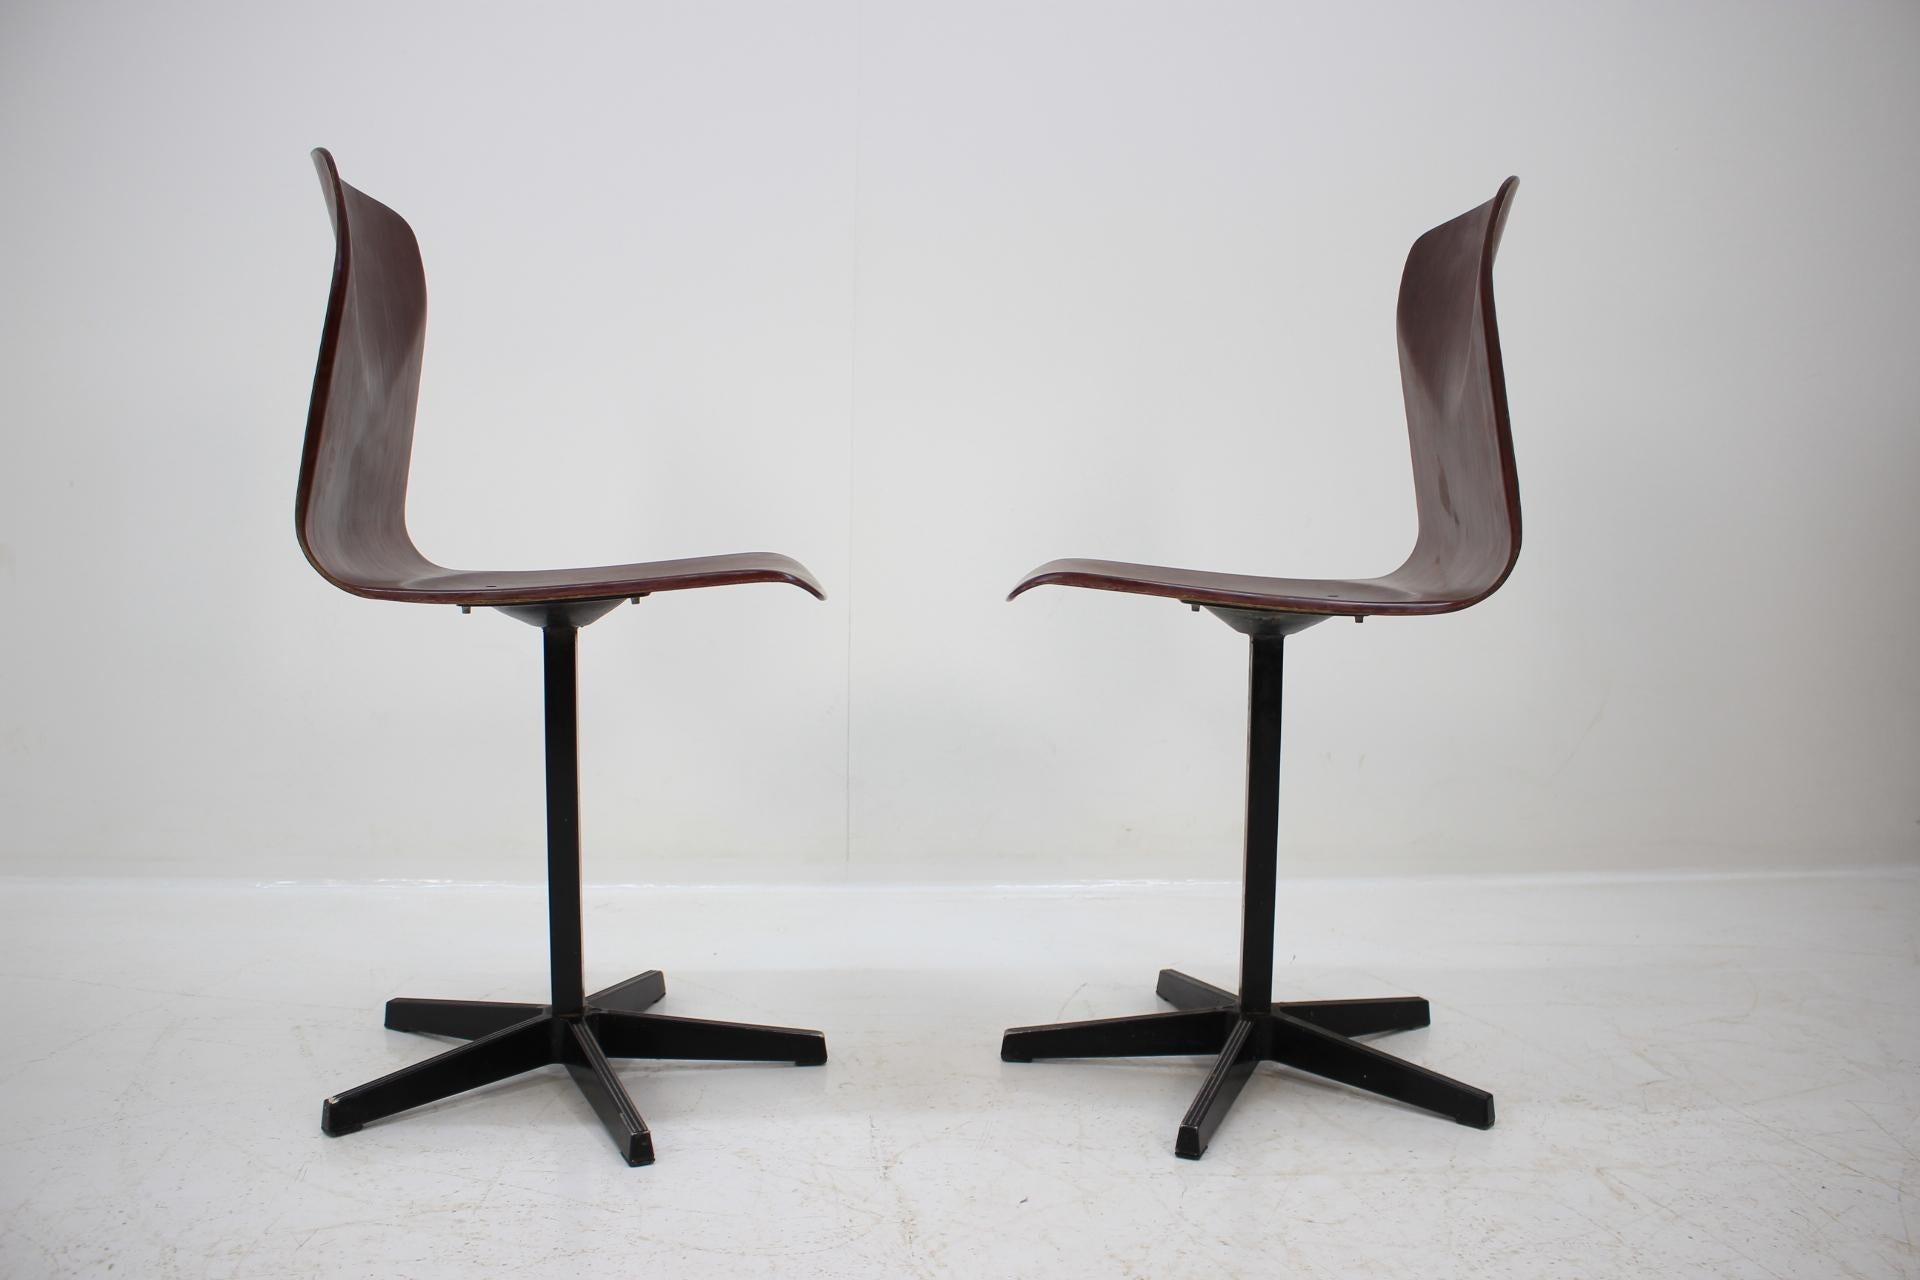 Pair of Midcentury Industrial Style Chairs, Elmar Flötotto for Pagholz, 1970s In Good Condition For Sale In Praha, CZ